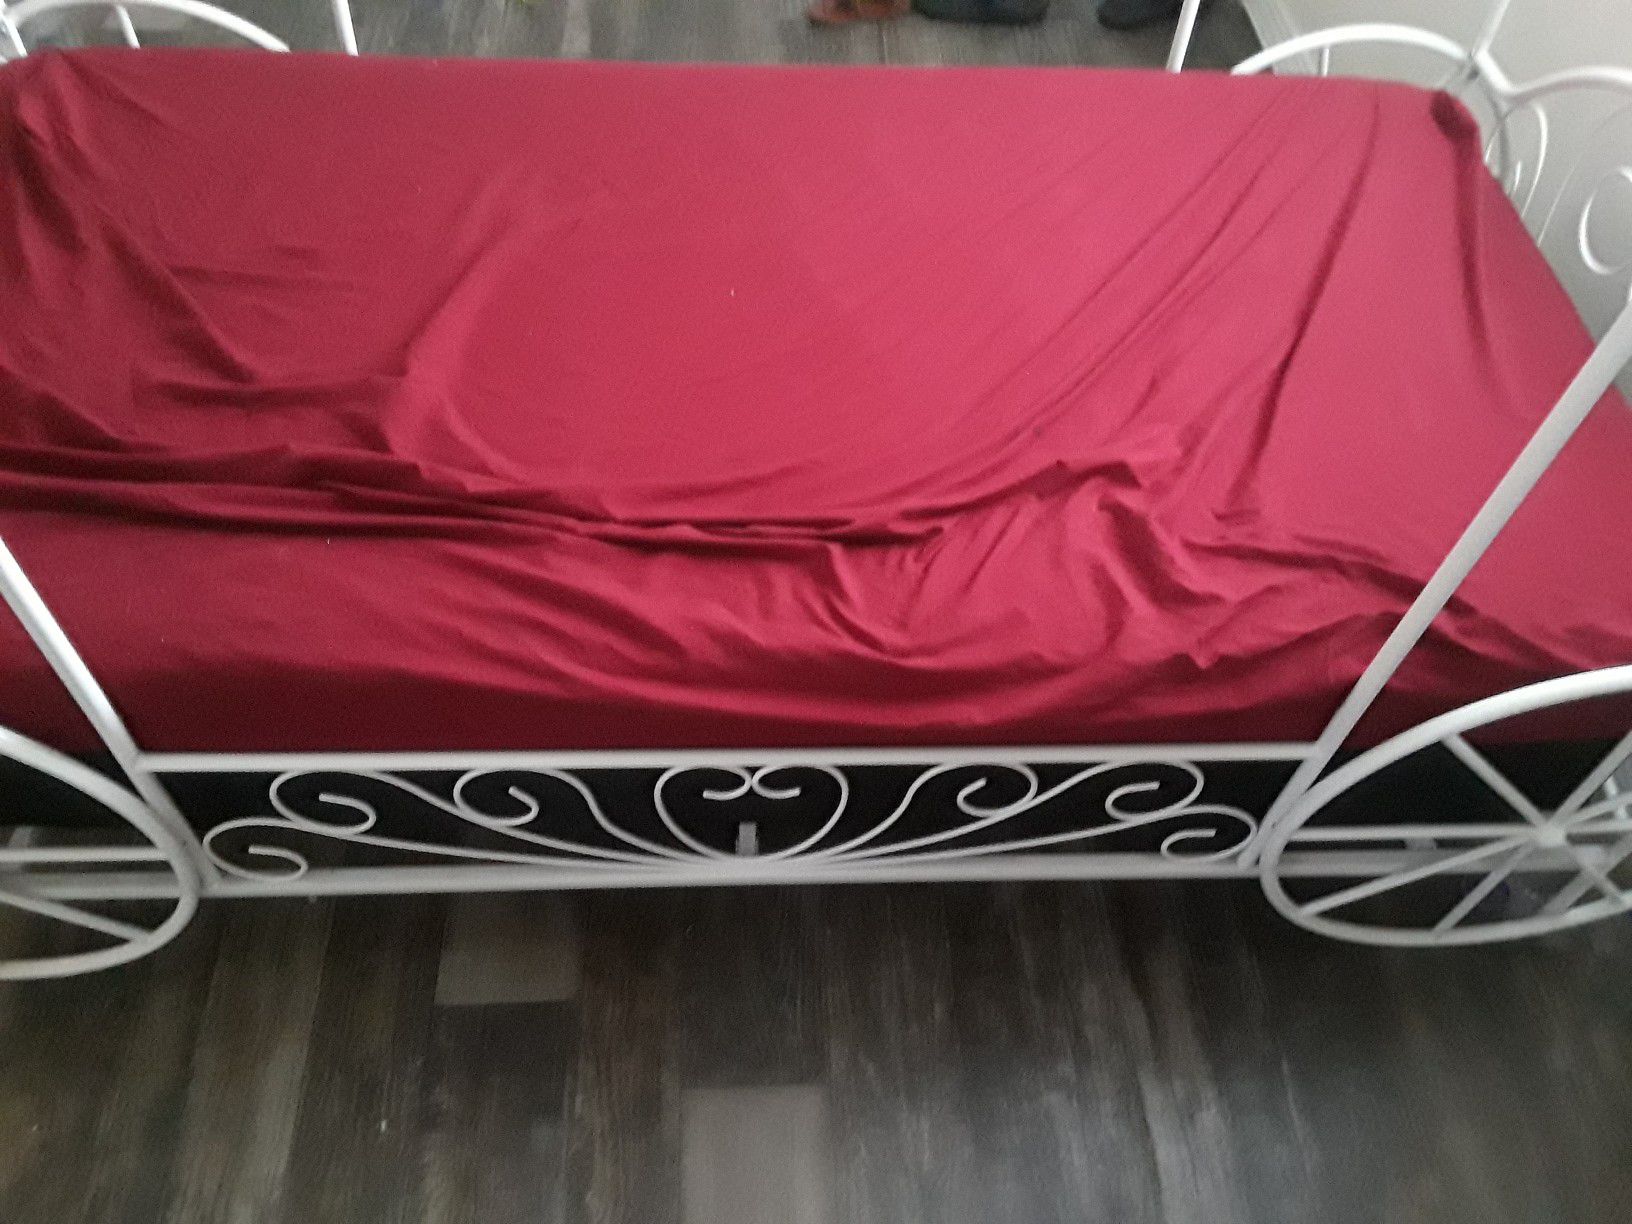 Twin Carriage bed frame and mattress together